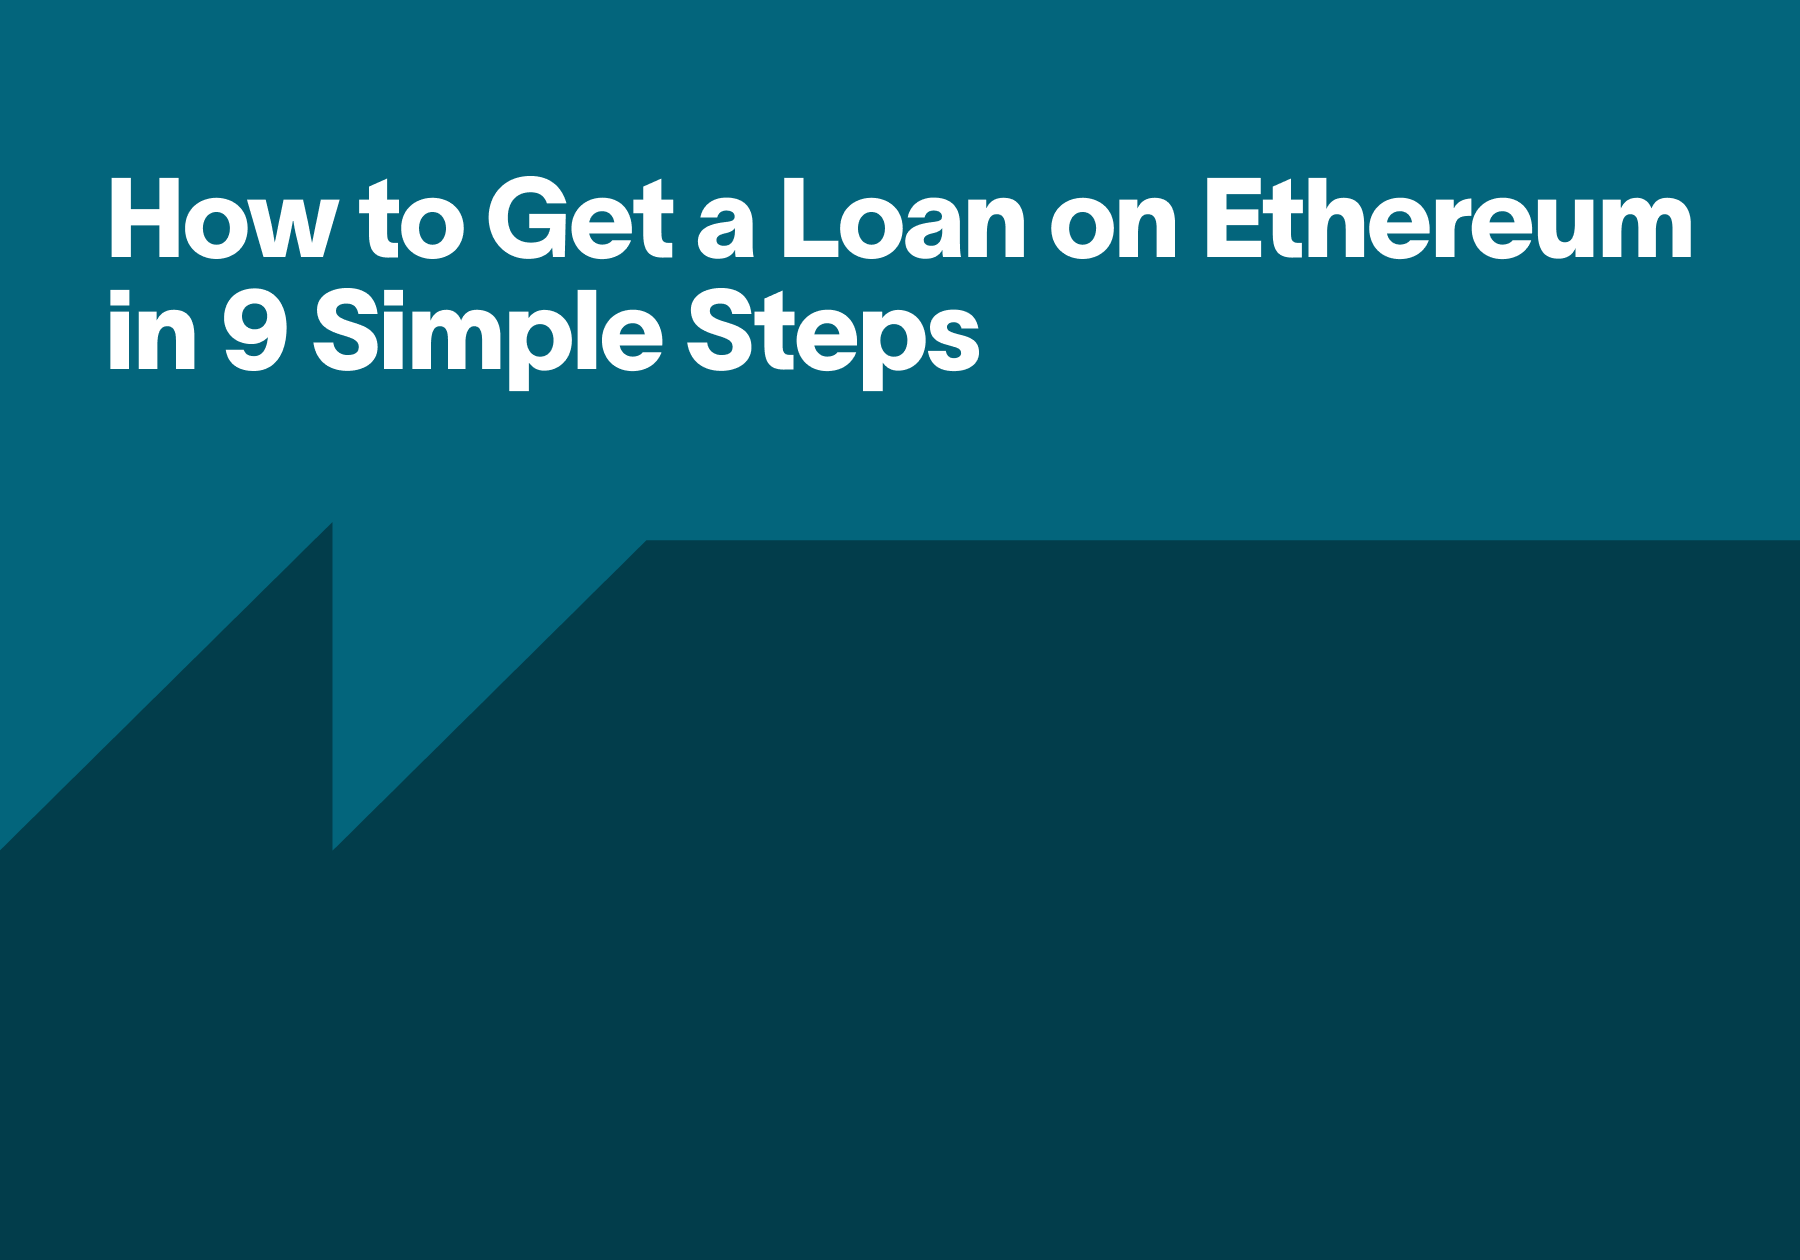 How to Get a Loan on Ethereum in 9 Simple Steps